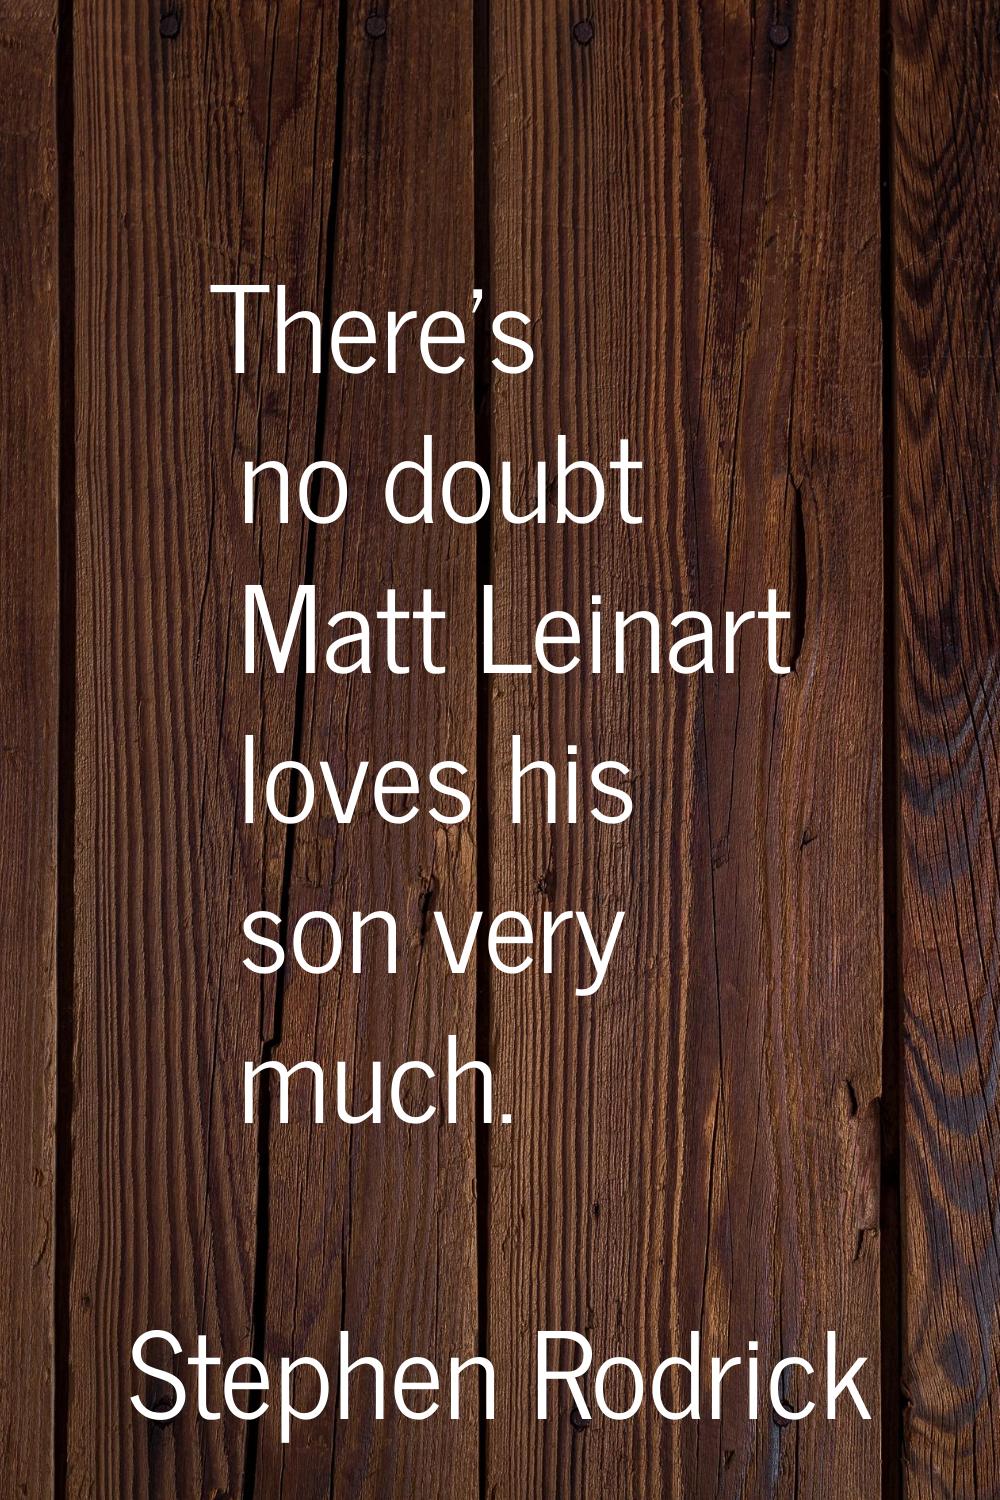 There's no doubt Matt Leinart loves his son very much.